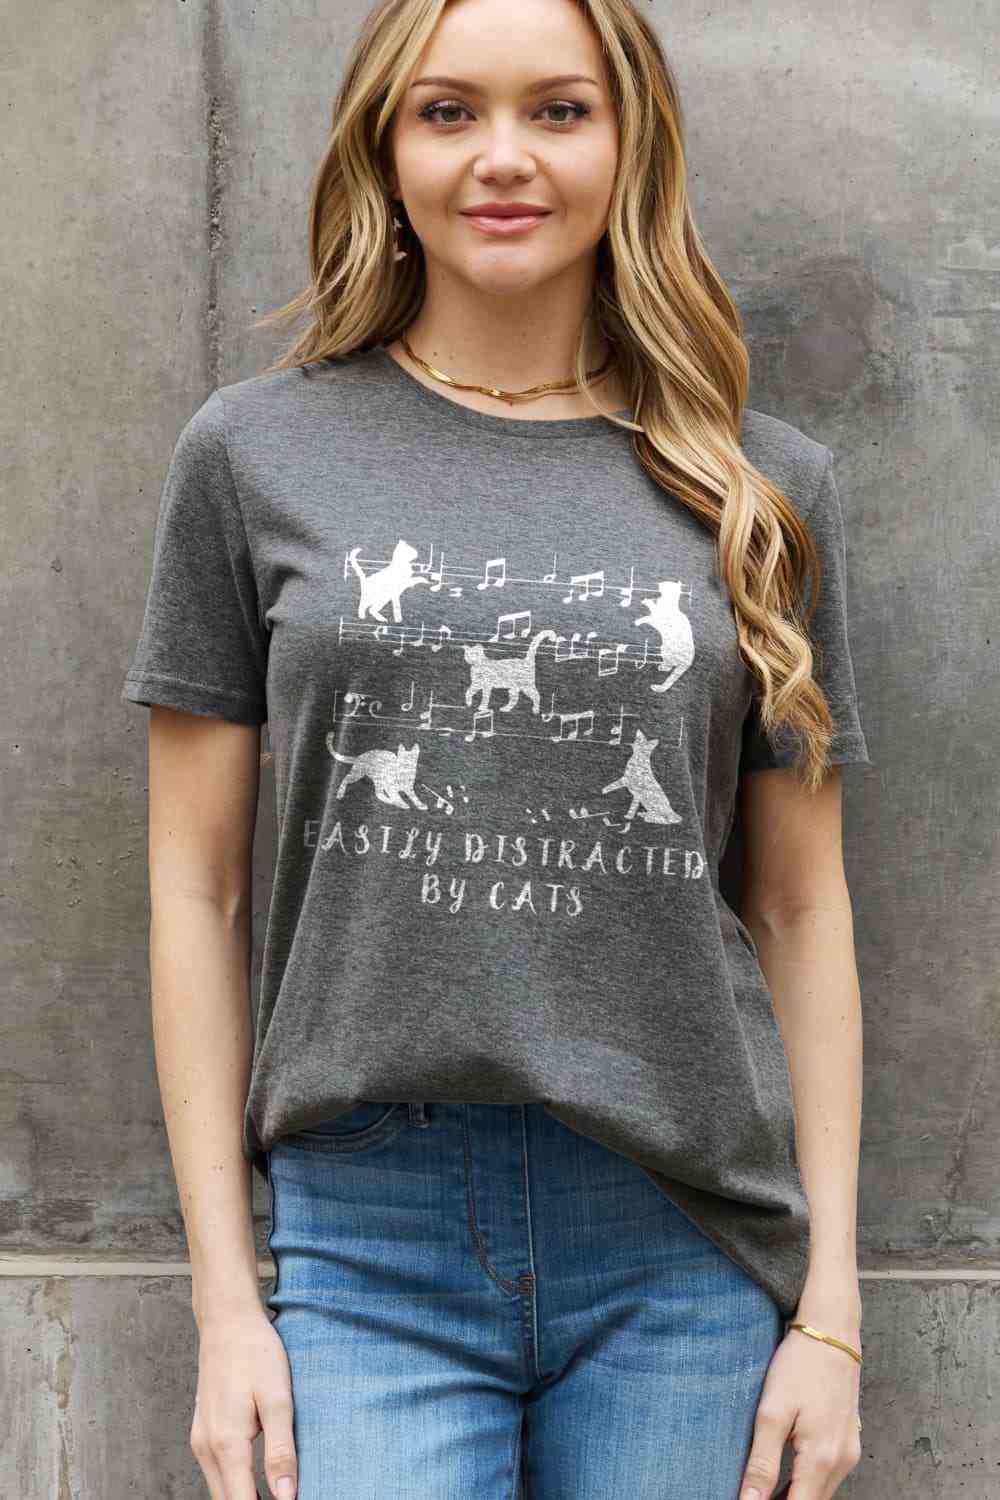 EASILY DISTRACTED BY CATS Graphic Cotton Tee - T-Shirts - Shirts & Tops - 4 - 2024